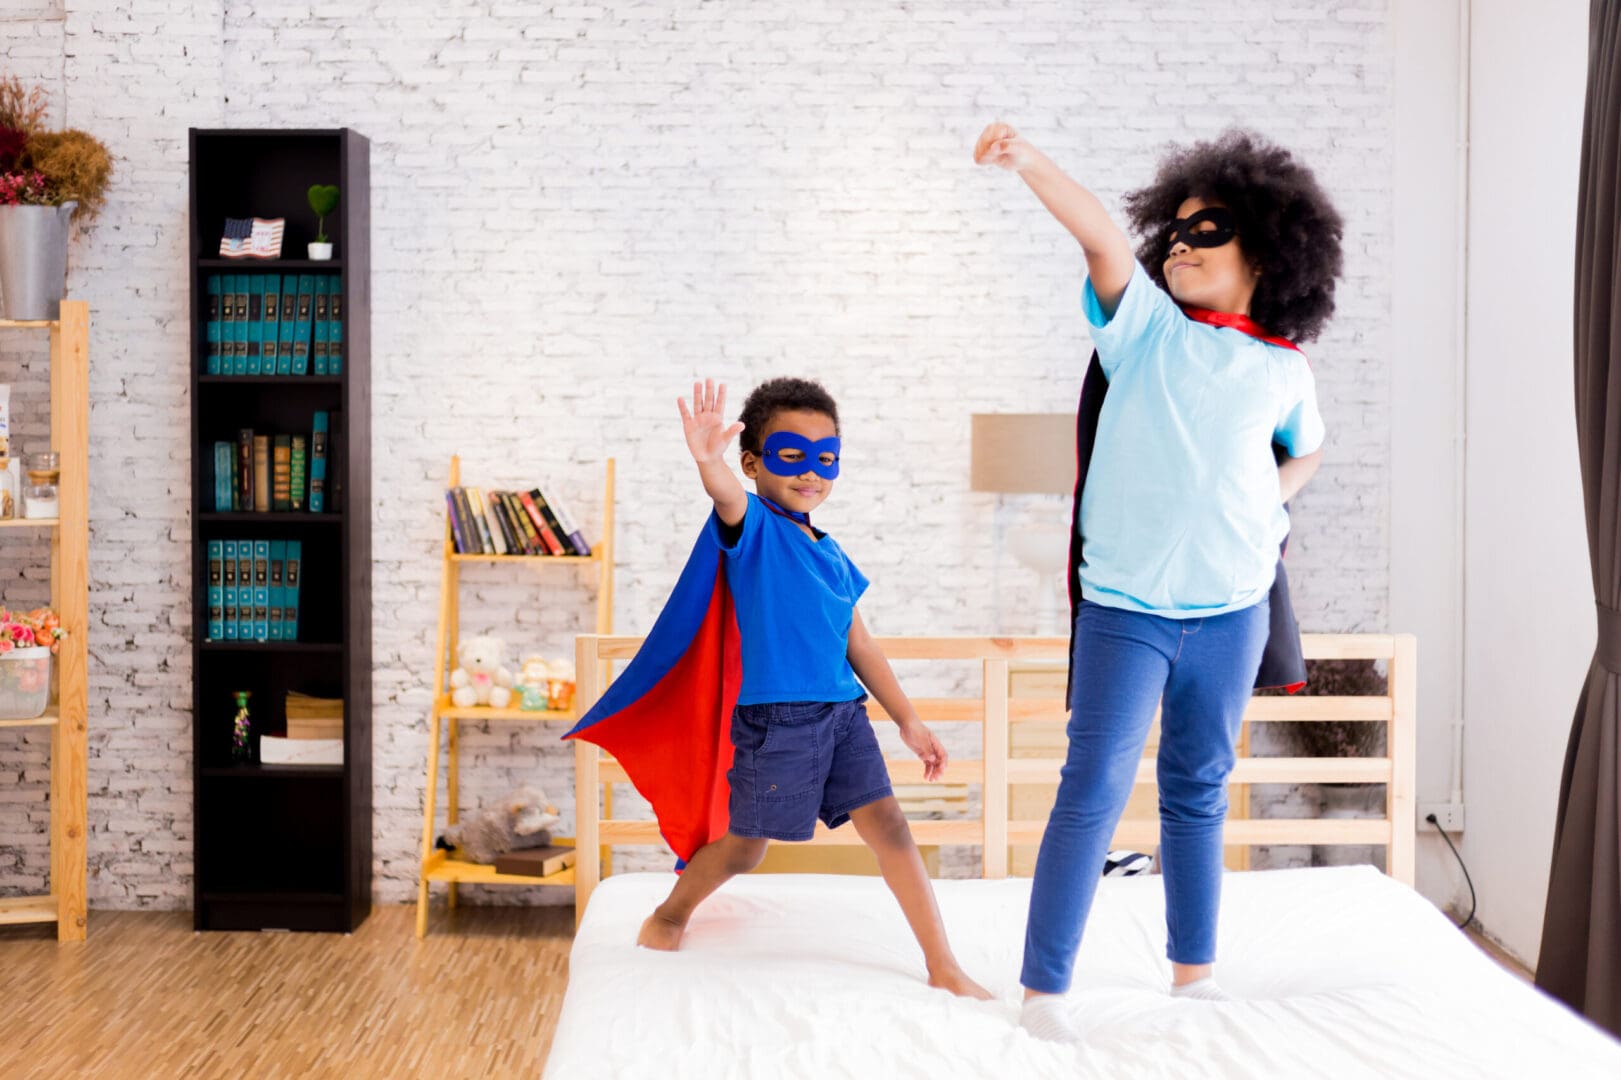 Two children dressed as superheroes in a room.